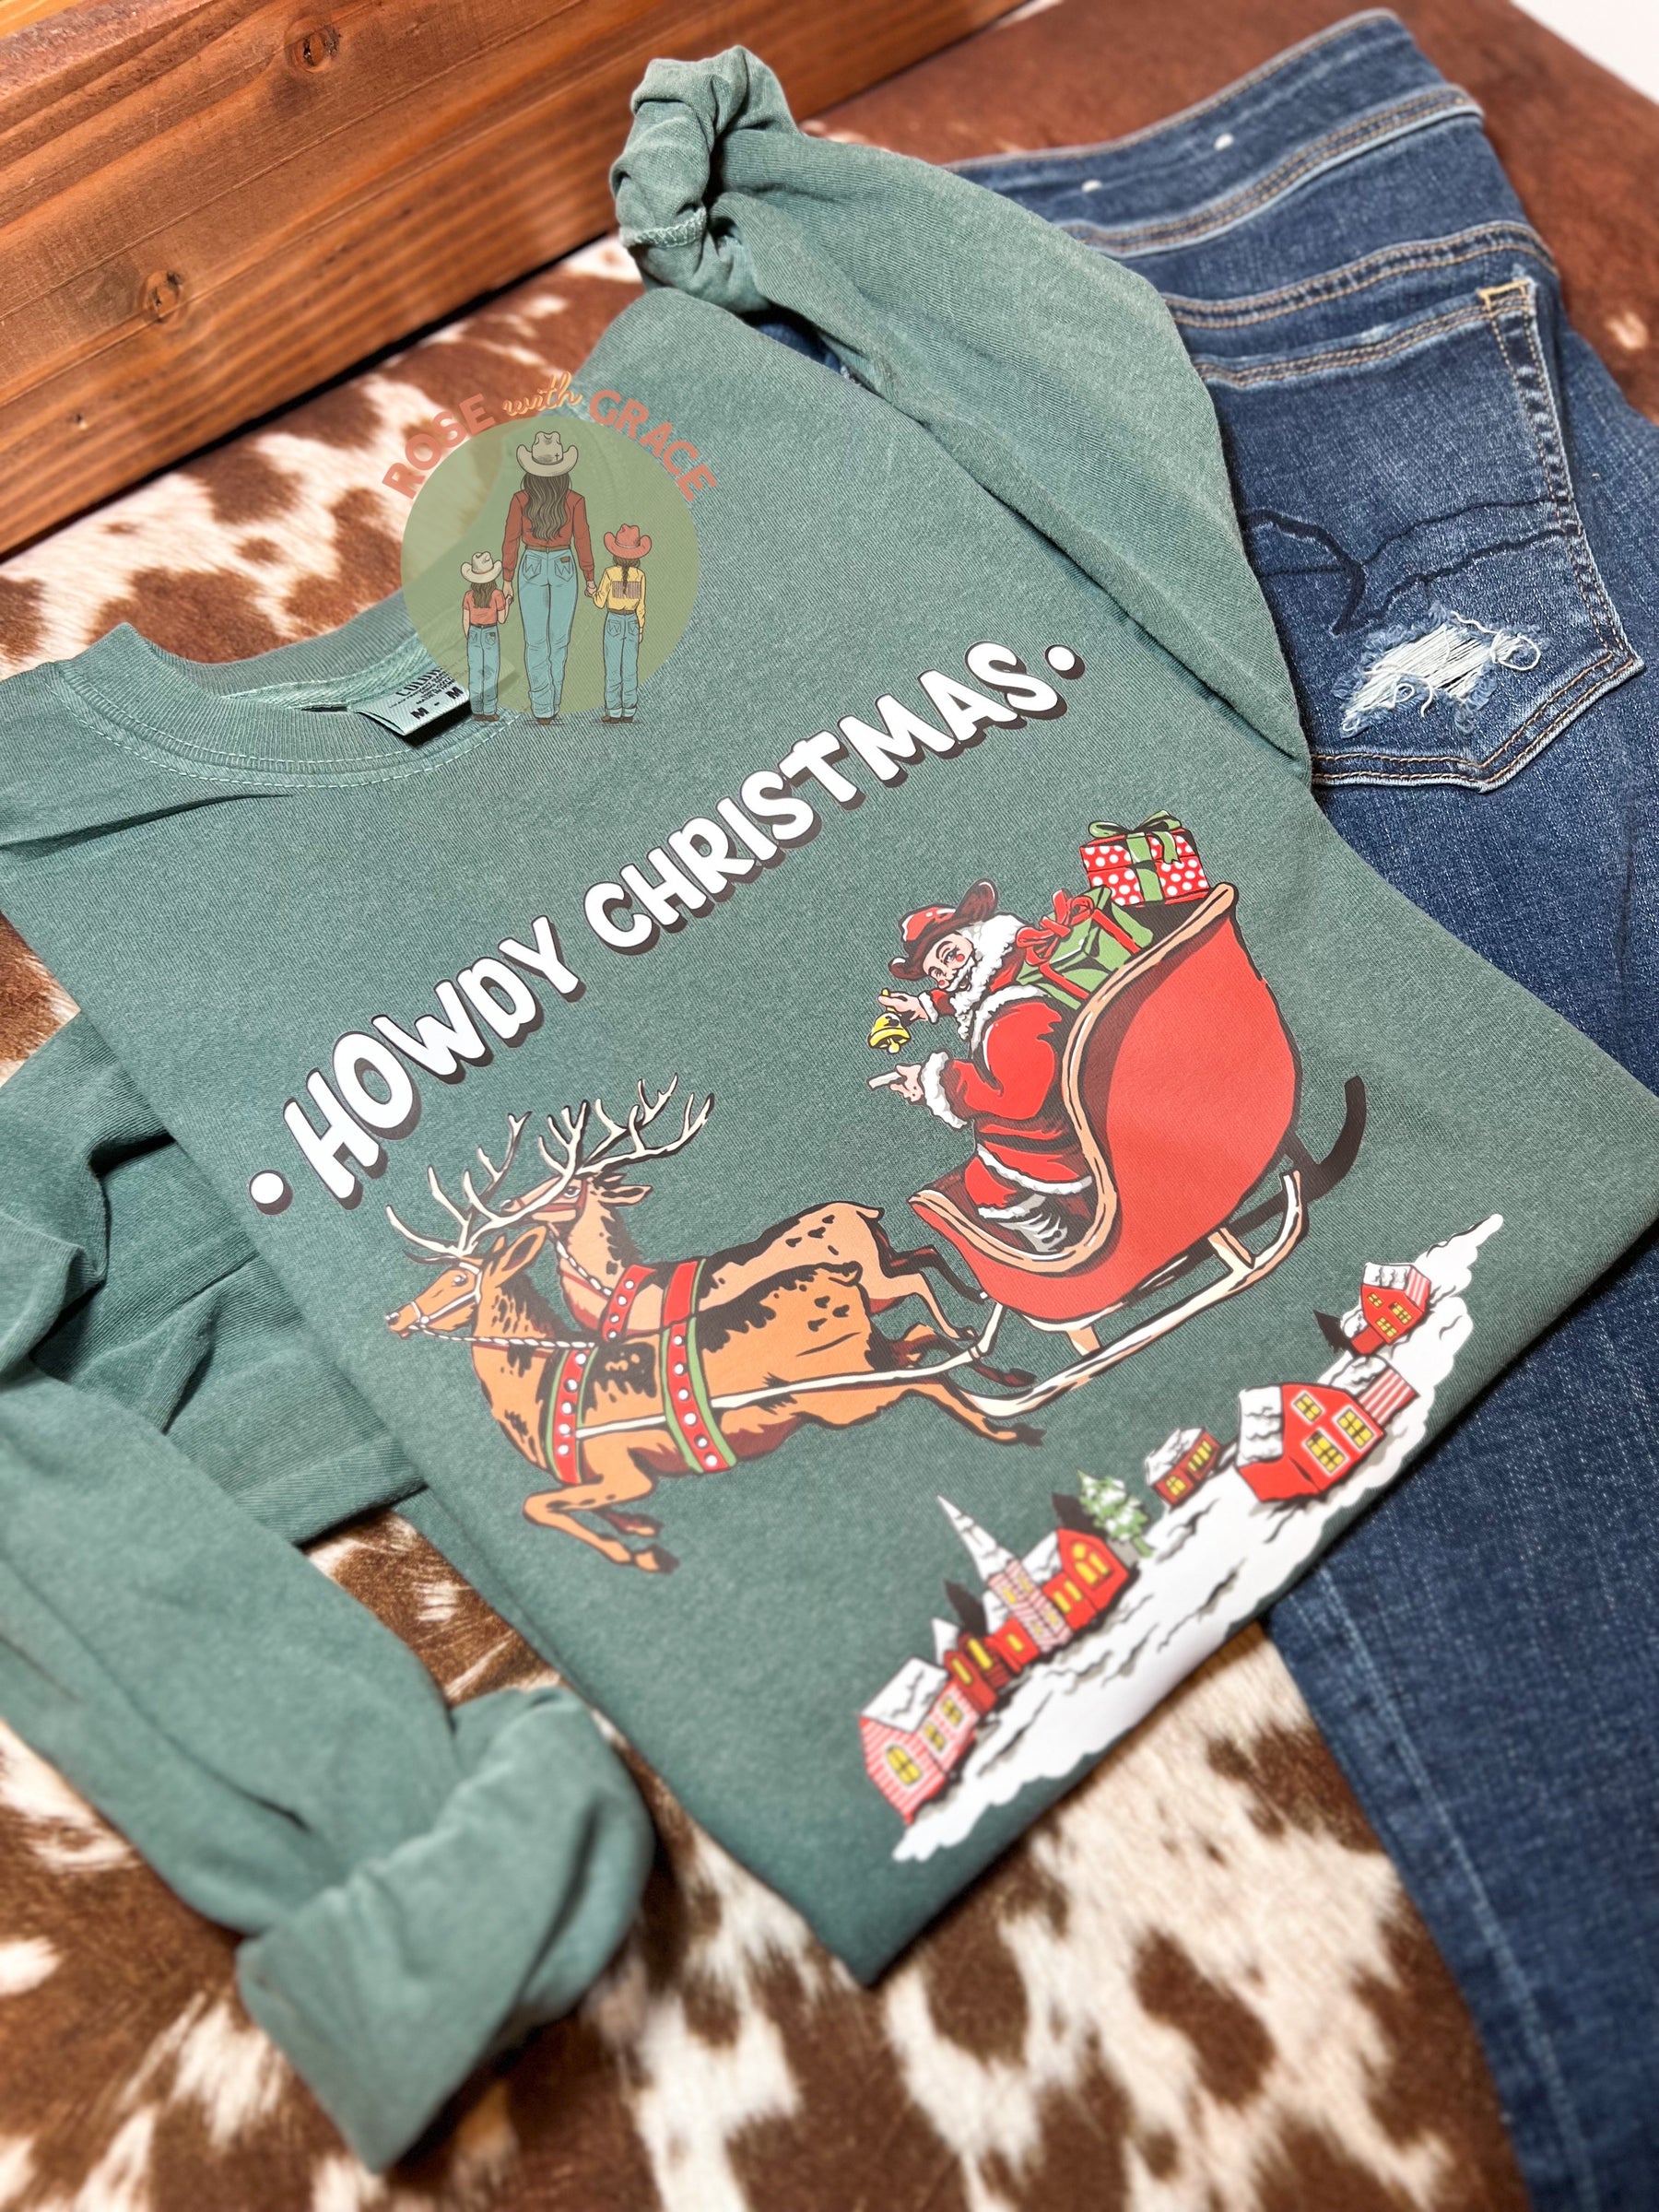 Howdy Christmas RWG Exclusive Comfort Colors T-Shirt